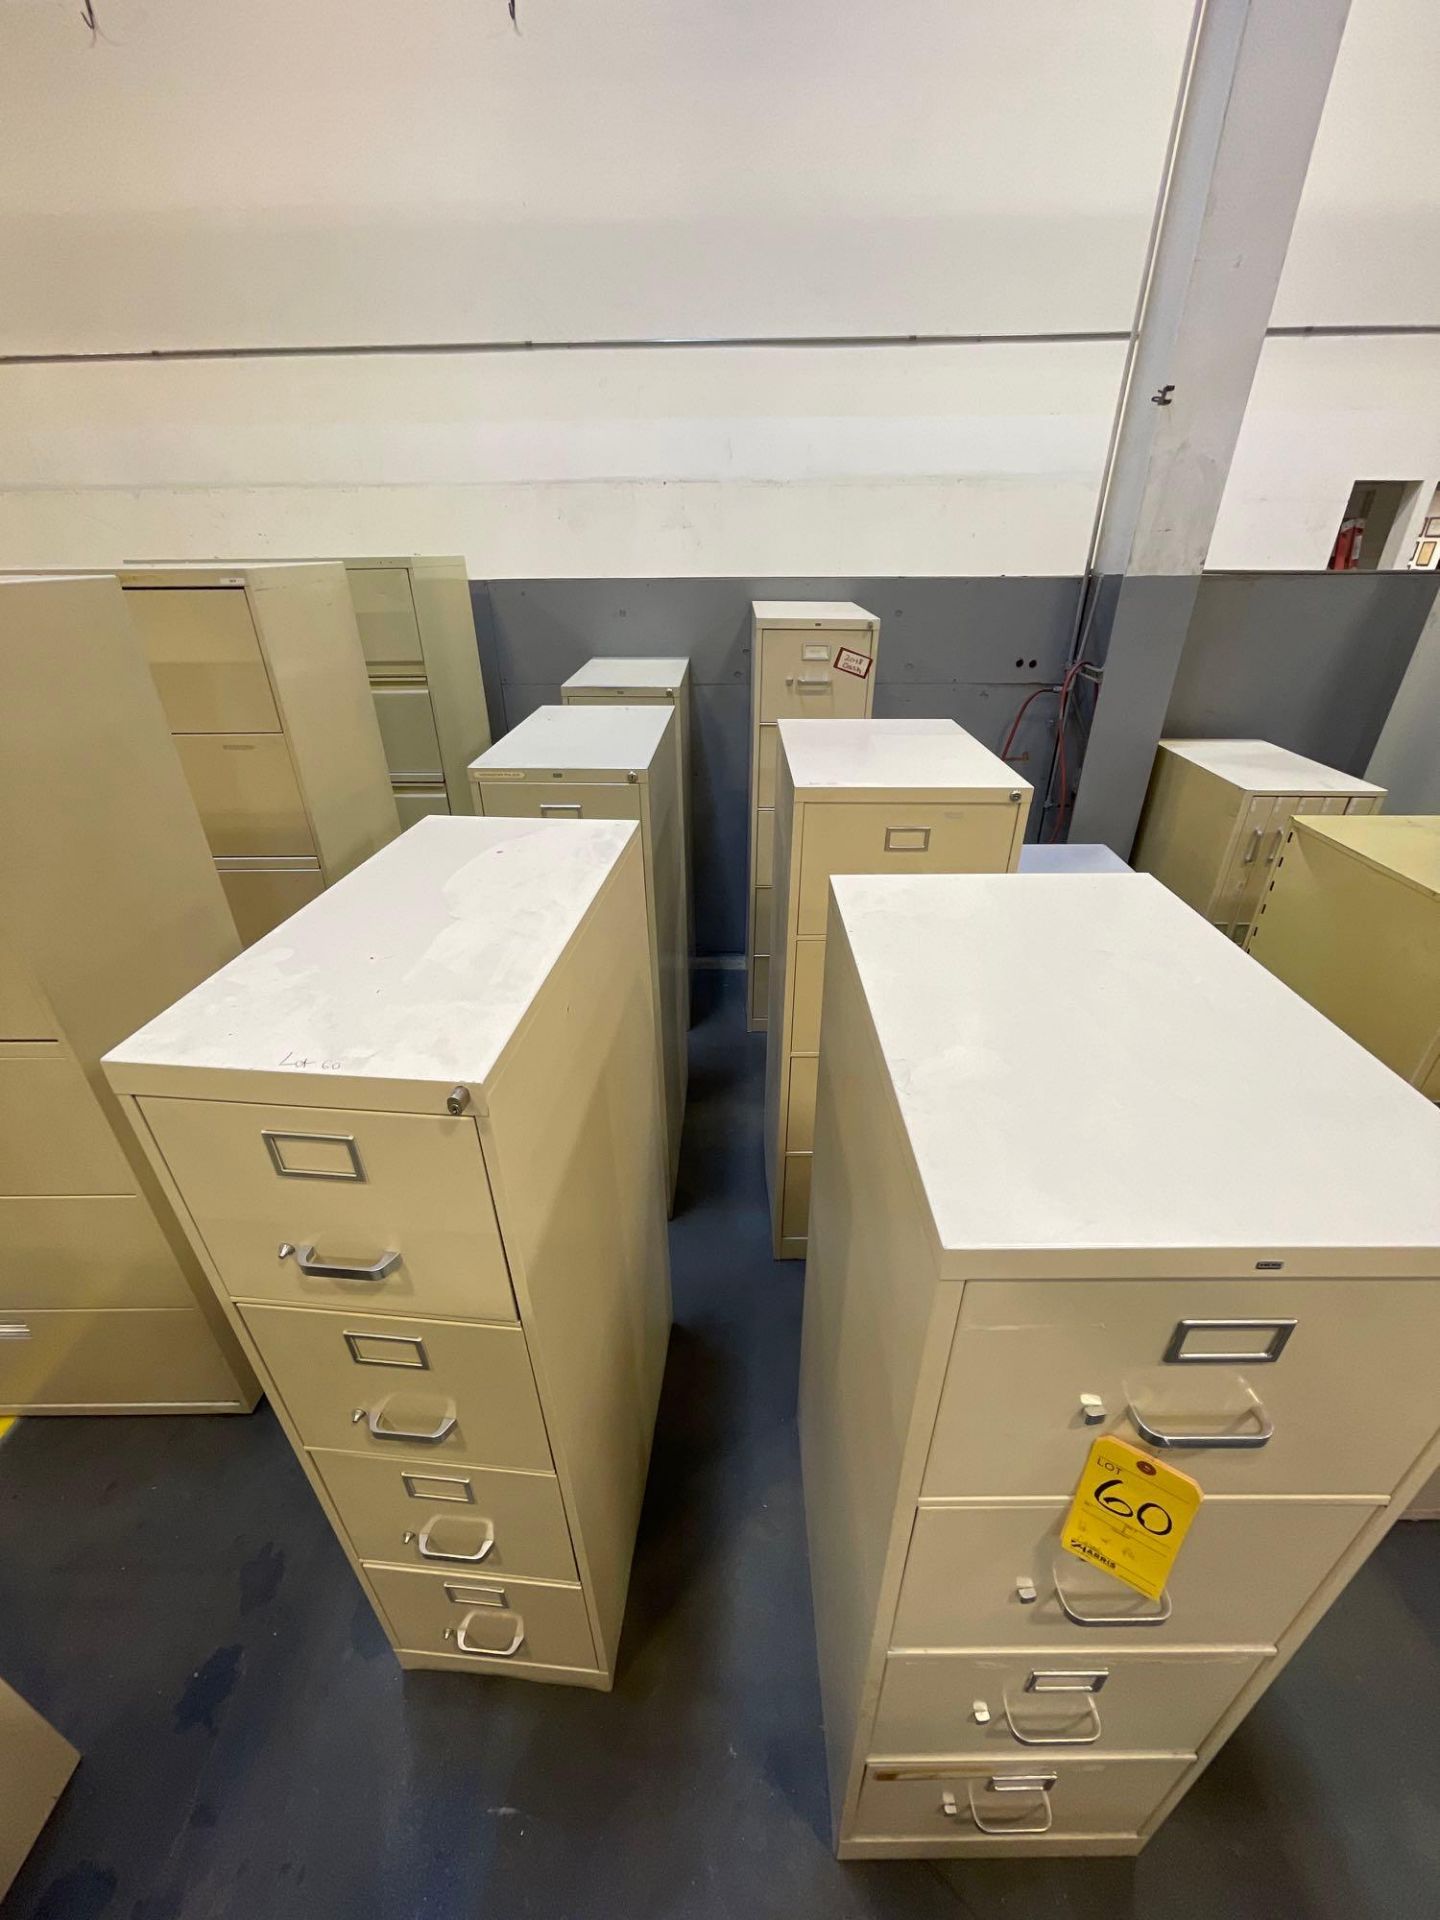 Lot of 6 Hon File Cabinets: (3) 29" X 15" X 52", (2) 26" X 18" X 52", (1) 26" X 15" X 60" - Image 2 of 7